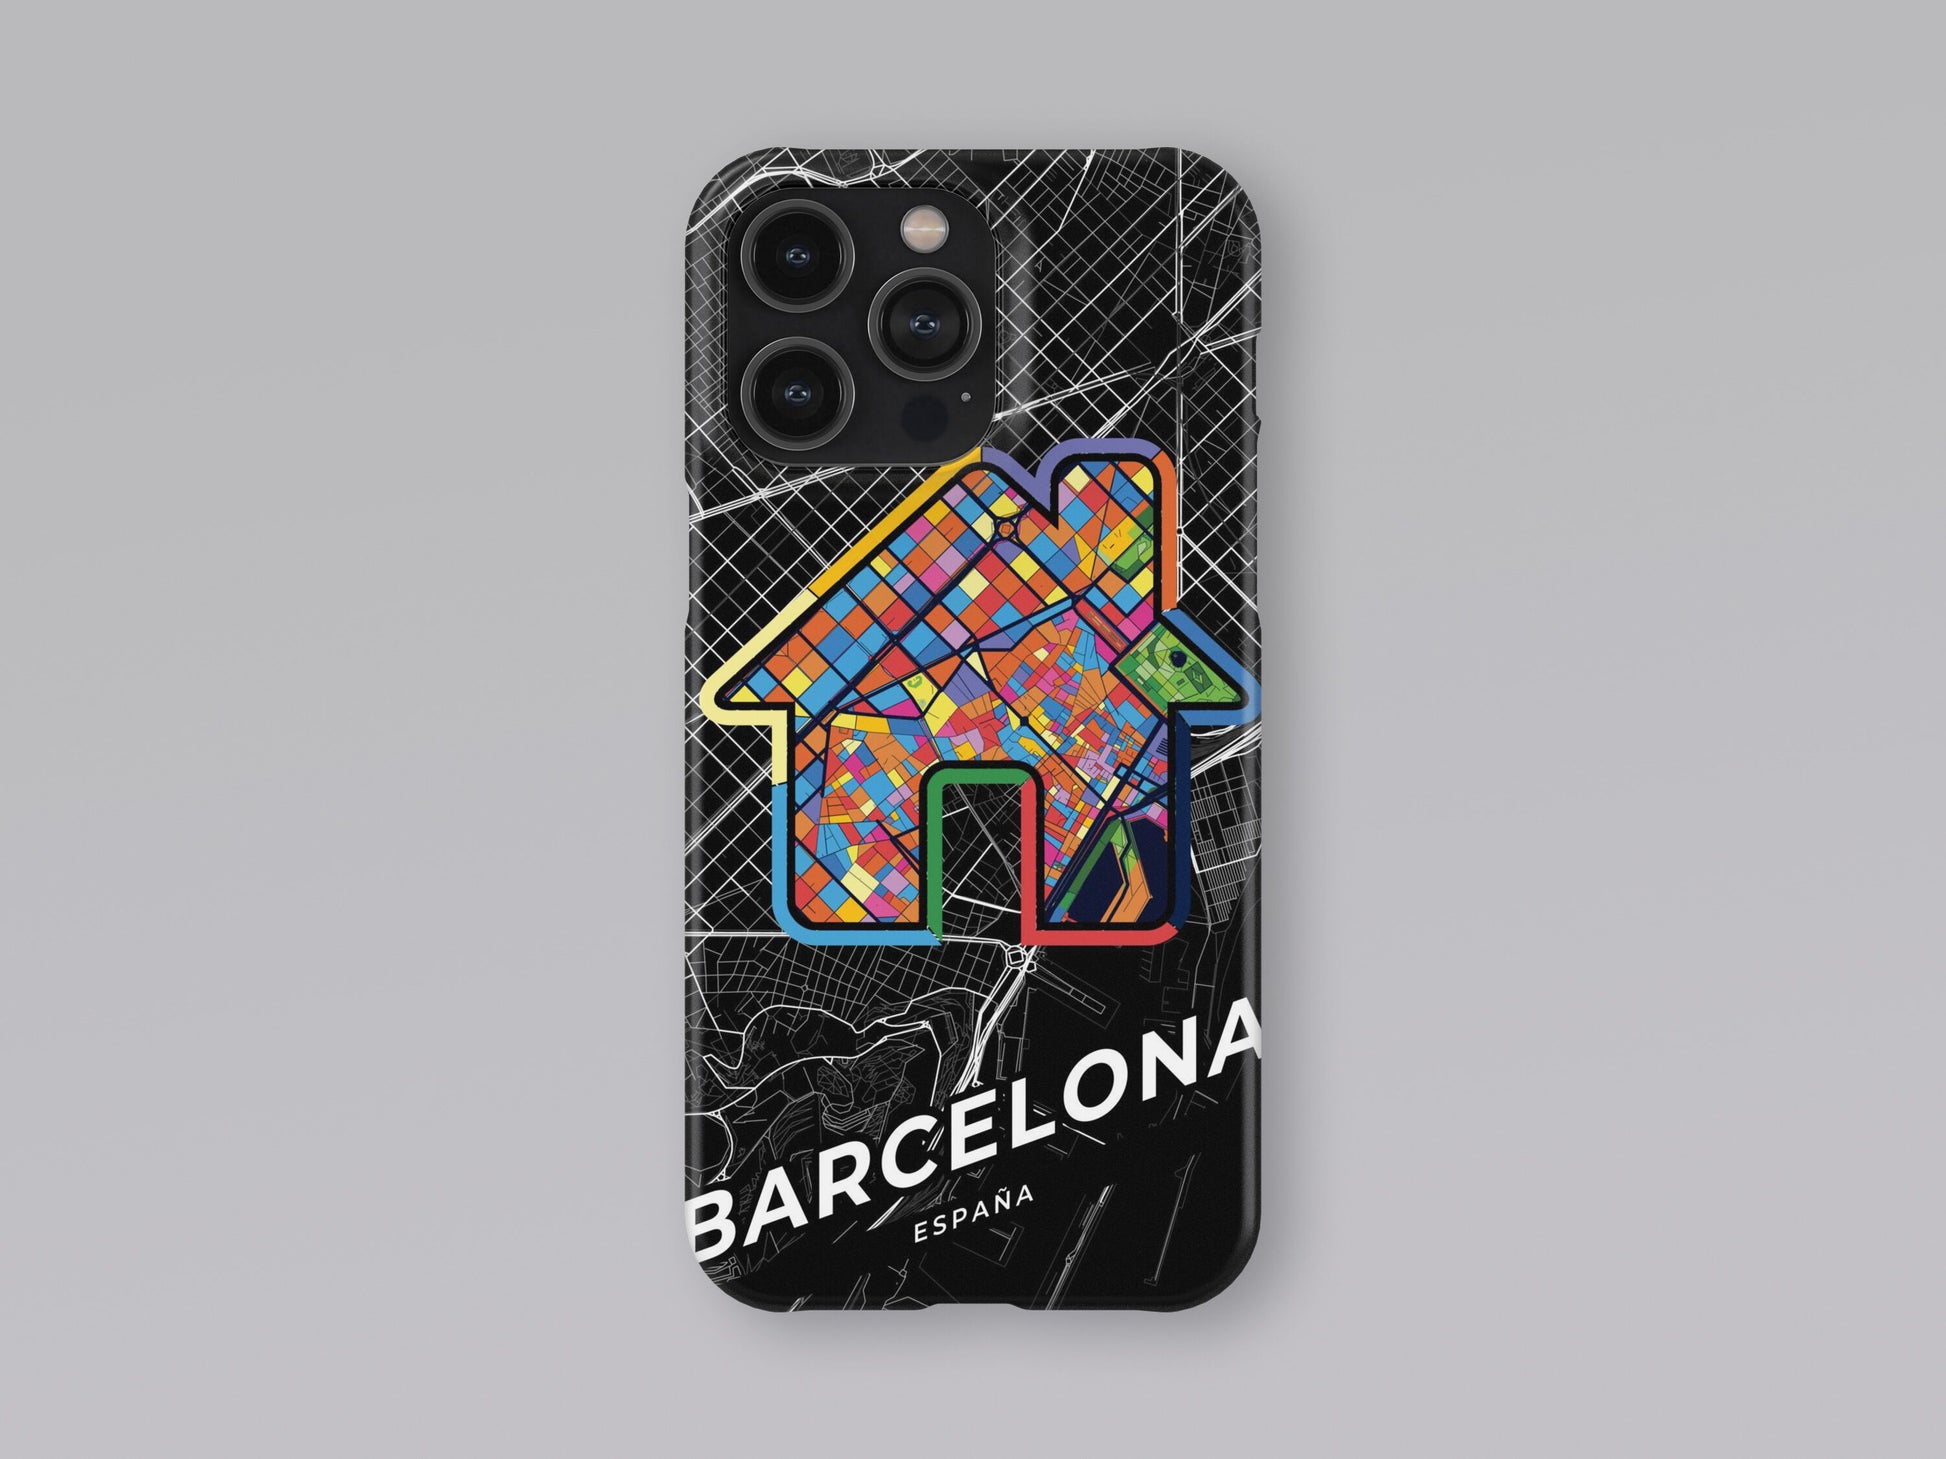 Barcelona Spain slim phone case with colorful icon. Birthday, wedding or housewarming gift. Couple match cases. 3